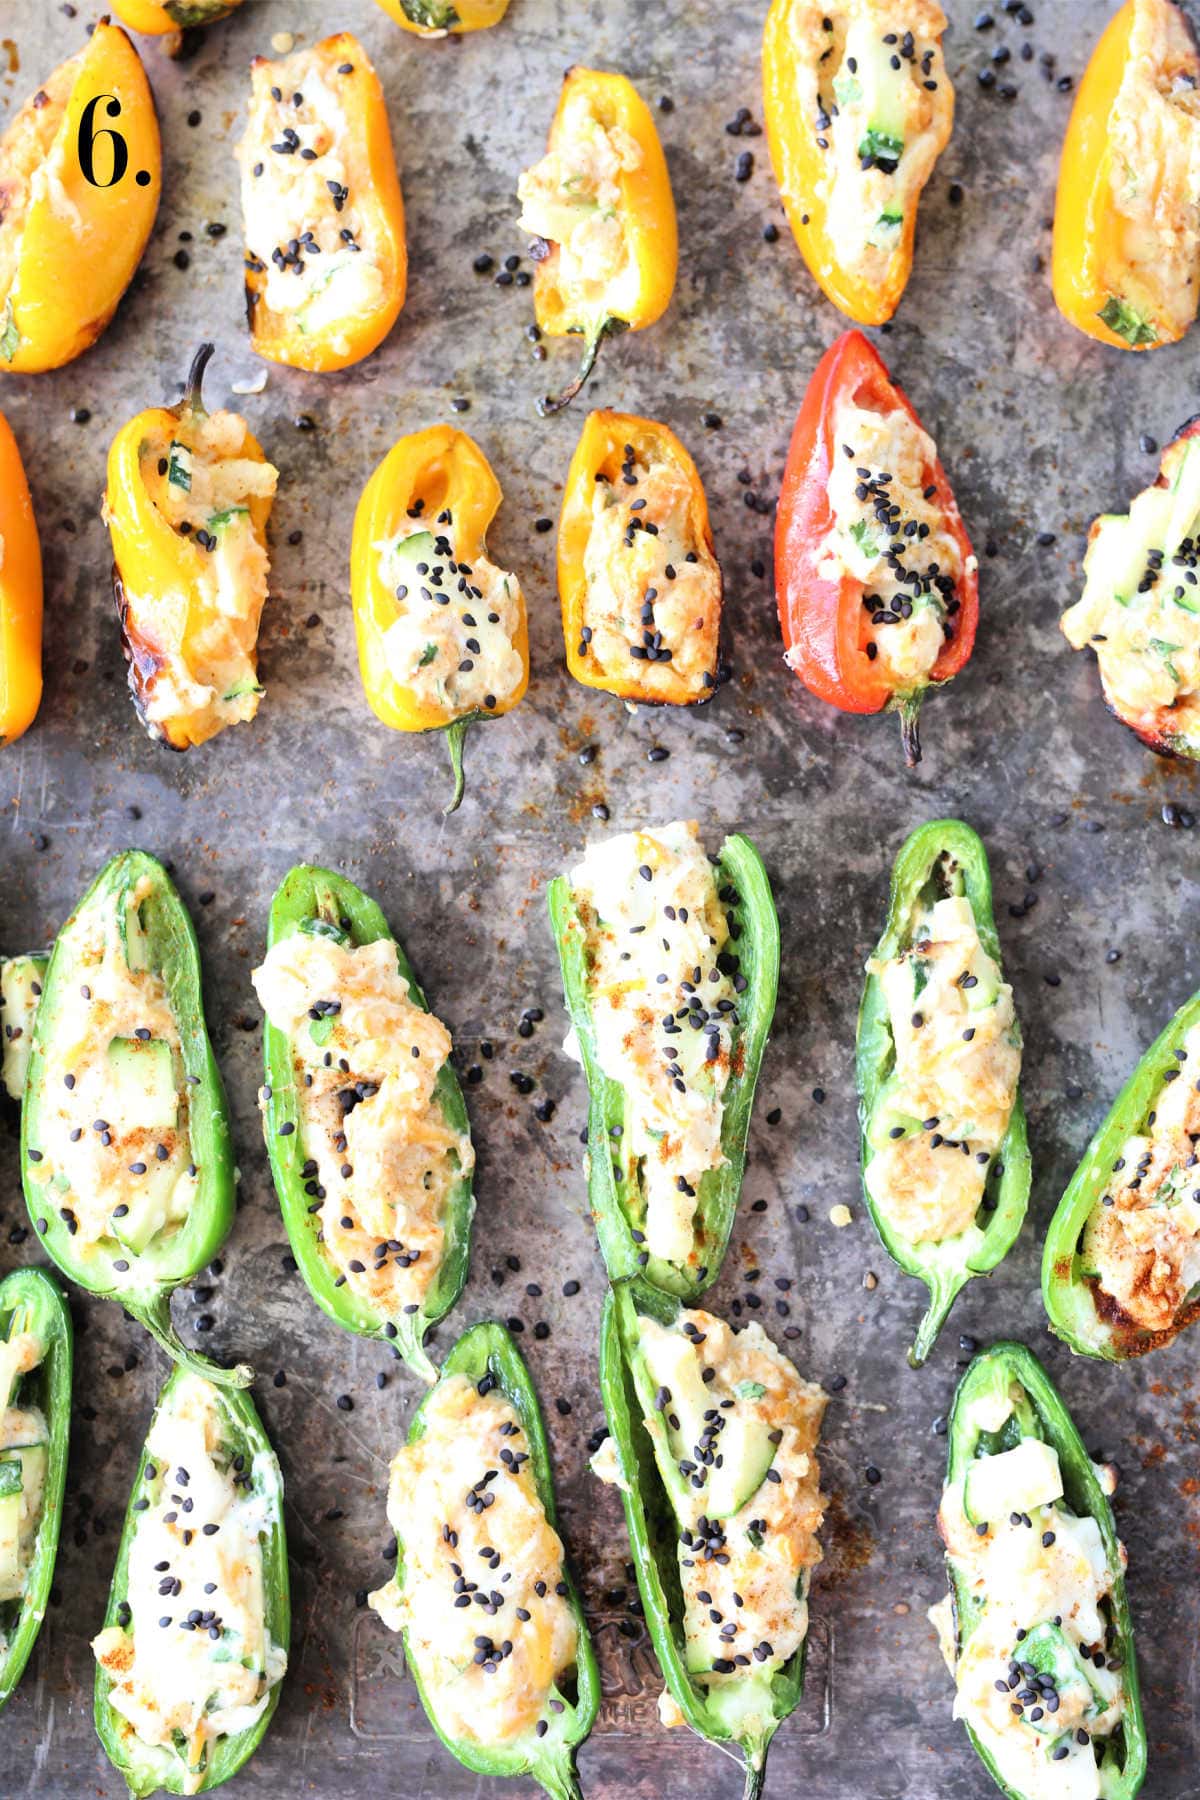 Stuffed and grilled jalapenos and mini sweet peppers filled with cream cheese filling on a baking sheet.